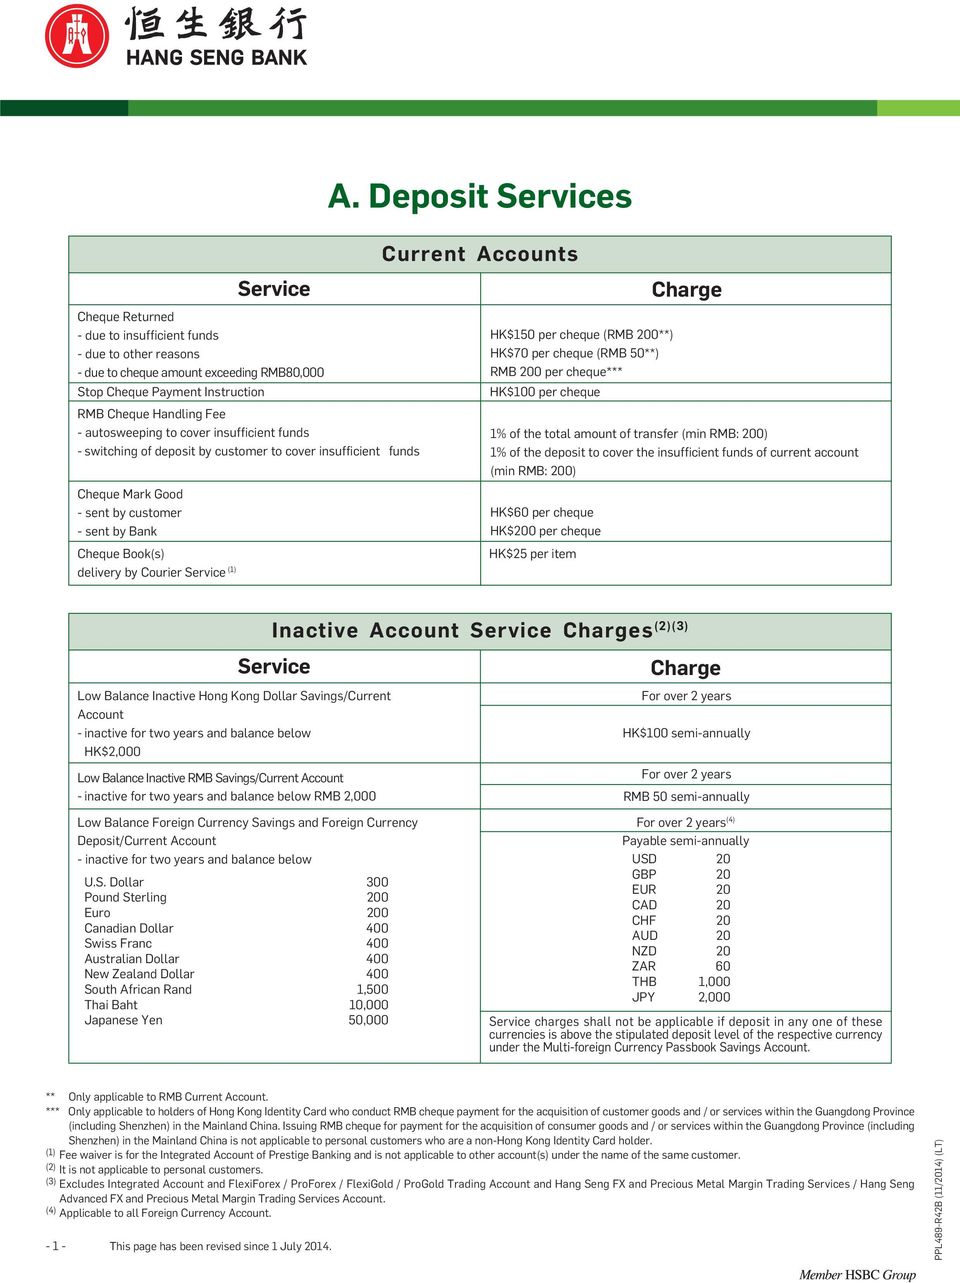 Deposit Services Current Accounts HK$150 per cheque (RMB 200**) HK$70 per cheque (RMB 50**) RMB 200 per cheque*** HK$100 per cheque HK$60 per cheque HK$200 per cheque HK$25 per item Charge 1% of the